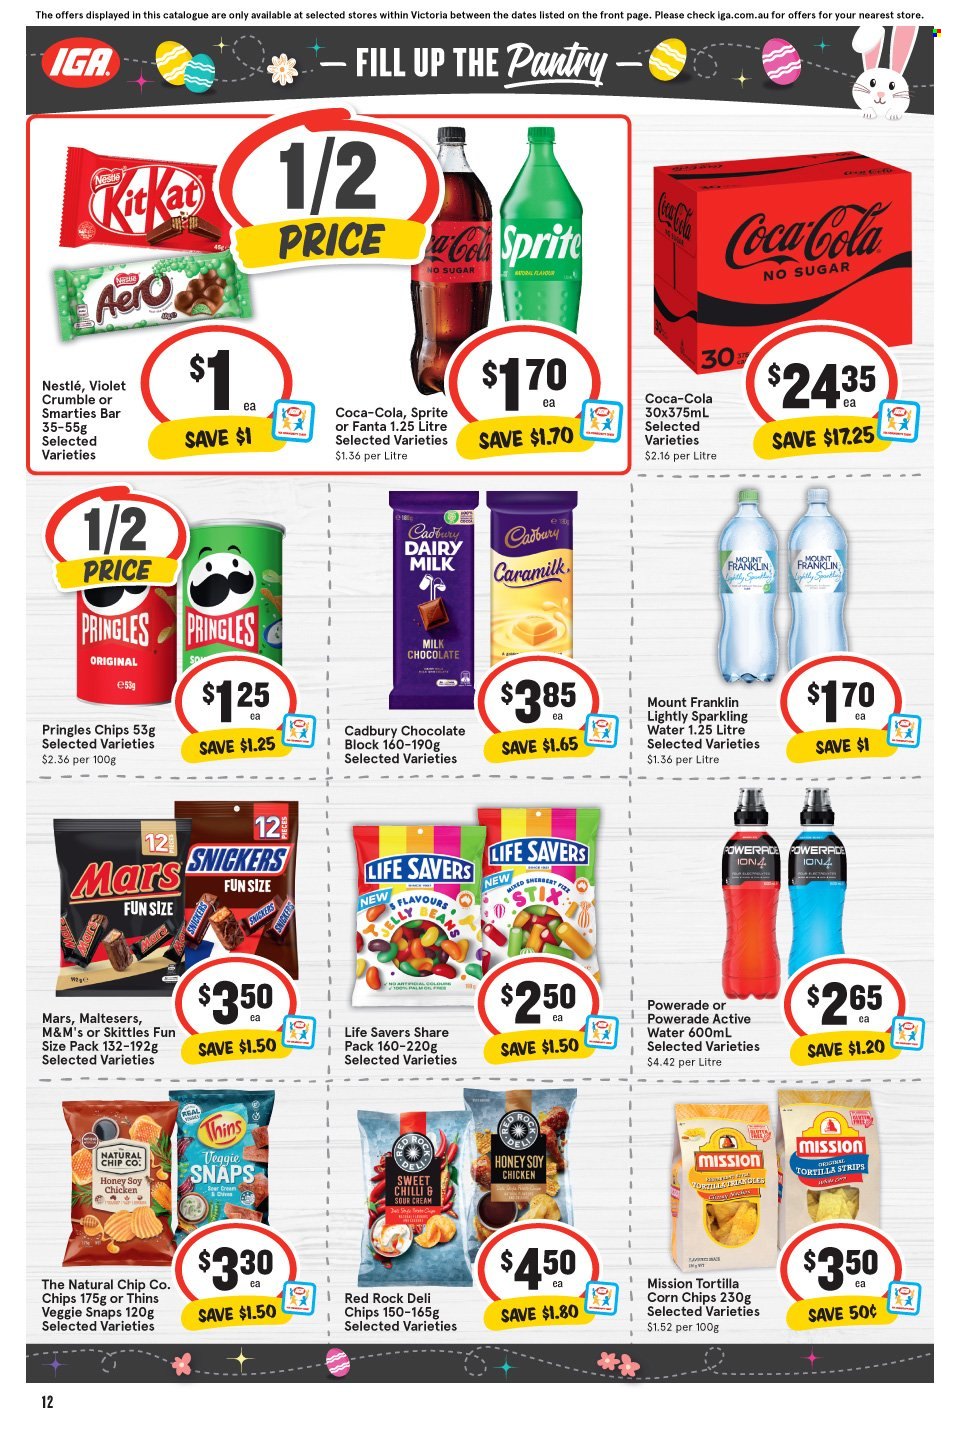 thumbnail - IGA Catalogue - 29 Mar 2023 - 4 Apr 2023 - Sales products - milk chocolate, Nestlé, chocolate, Snickers, Mars, M&M's, Smarties, Maltesers, Cadbury, Dairy Milk, Skittles, chocolate candies, chocolate bar, sweets, tortilla chips, Pringles, chips, Thins, corn chips, salty snack, Coca-Cola, Sprite, Powerade, energy drink, Fanta, soft drink, sparkling water, water, carbonated soft drink, chicken. Page 13.